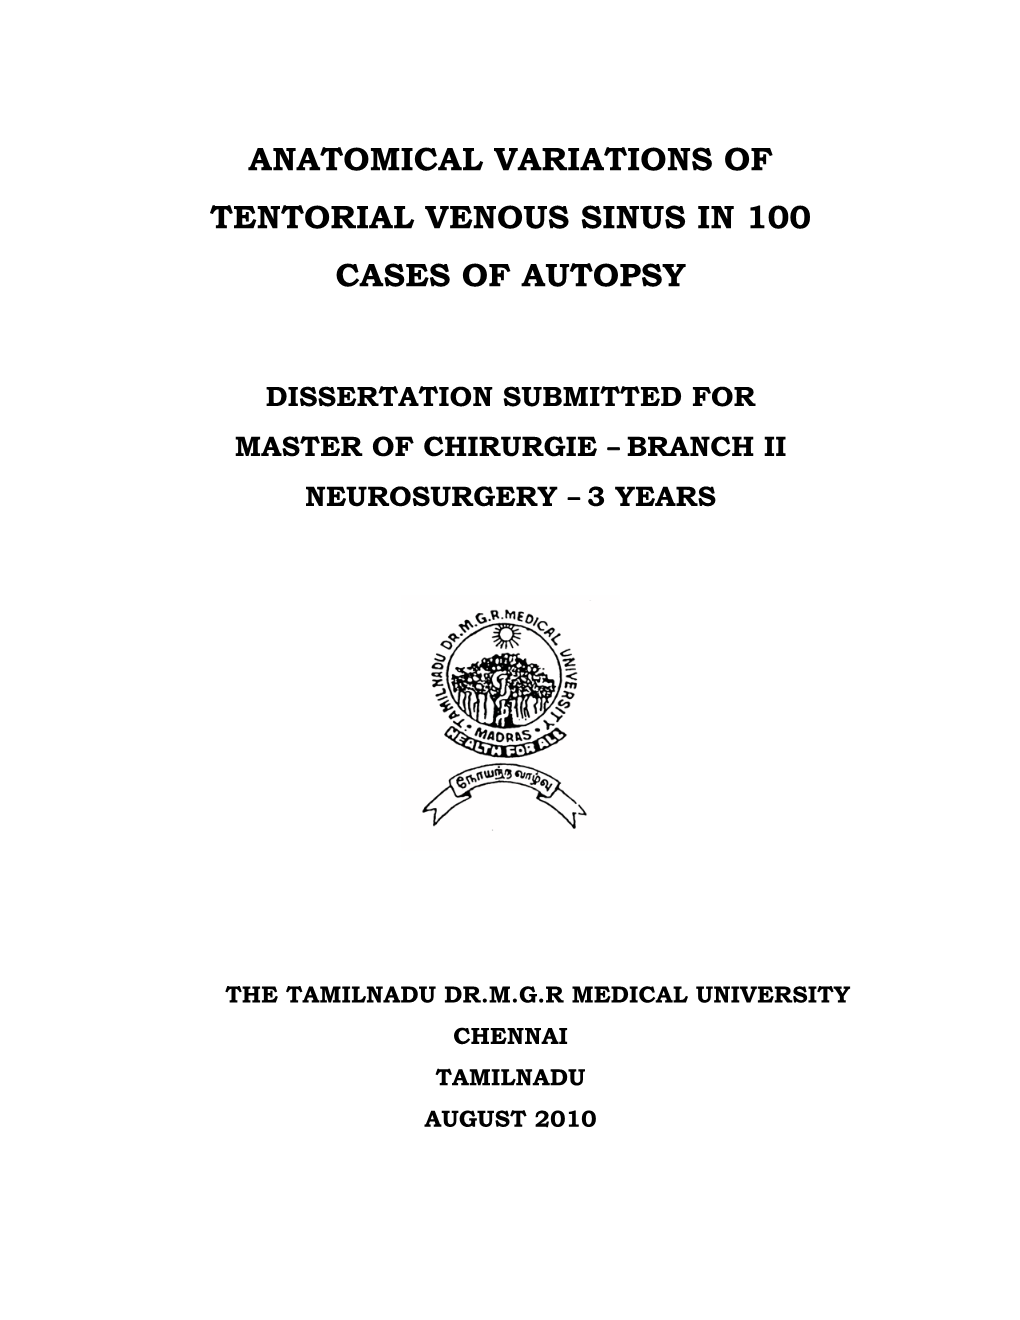 Anatomical Variations of Tentorial Venous Sinus in 100 Cases of Autopsy